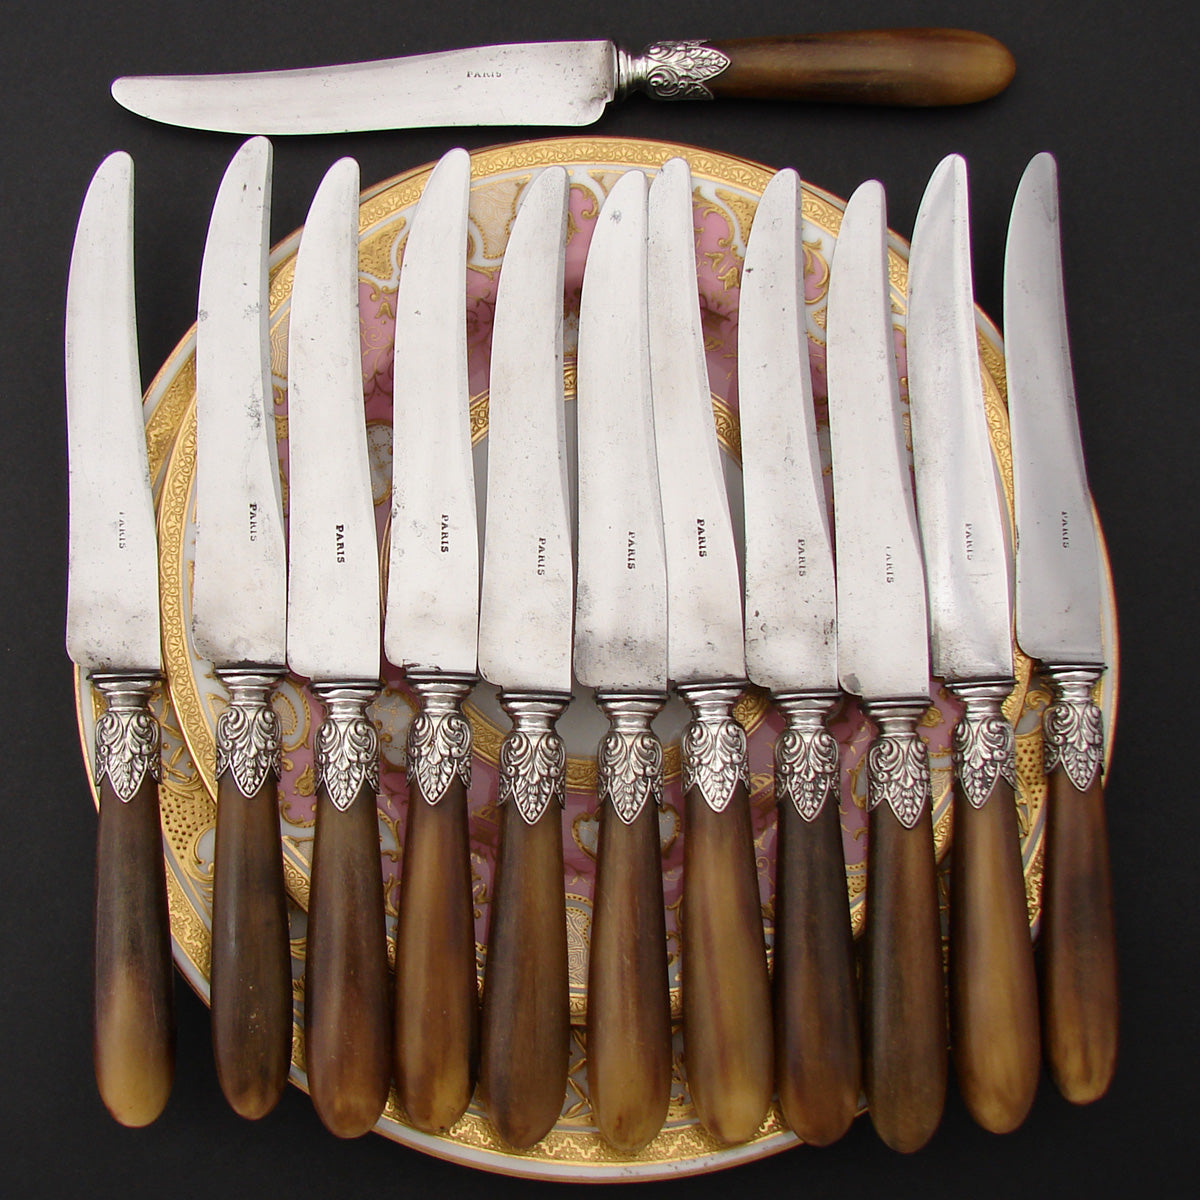 Antique French Empire Style 27pc Dinner Knife Set, Genuine Horn & Silver  Handles